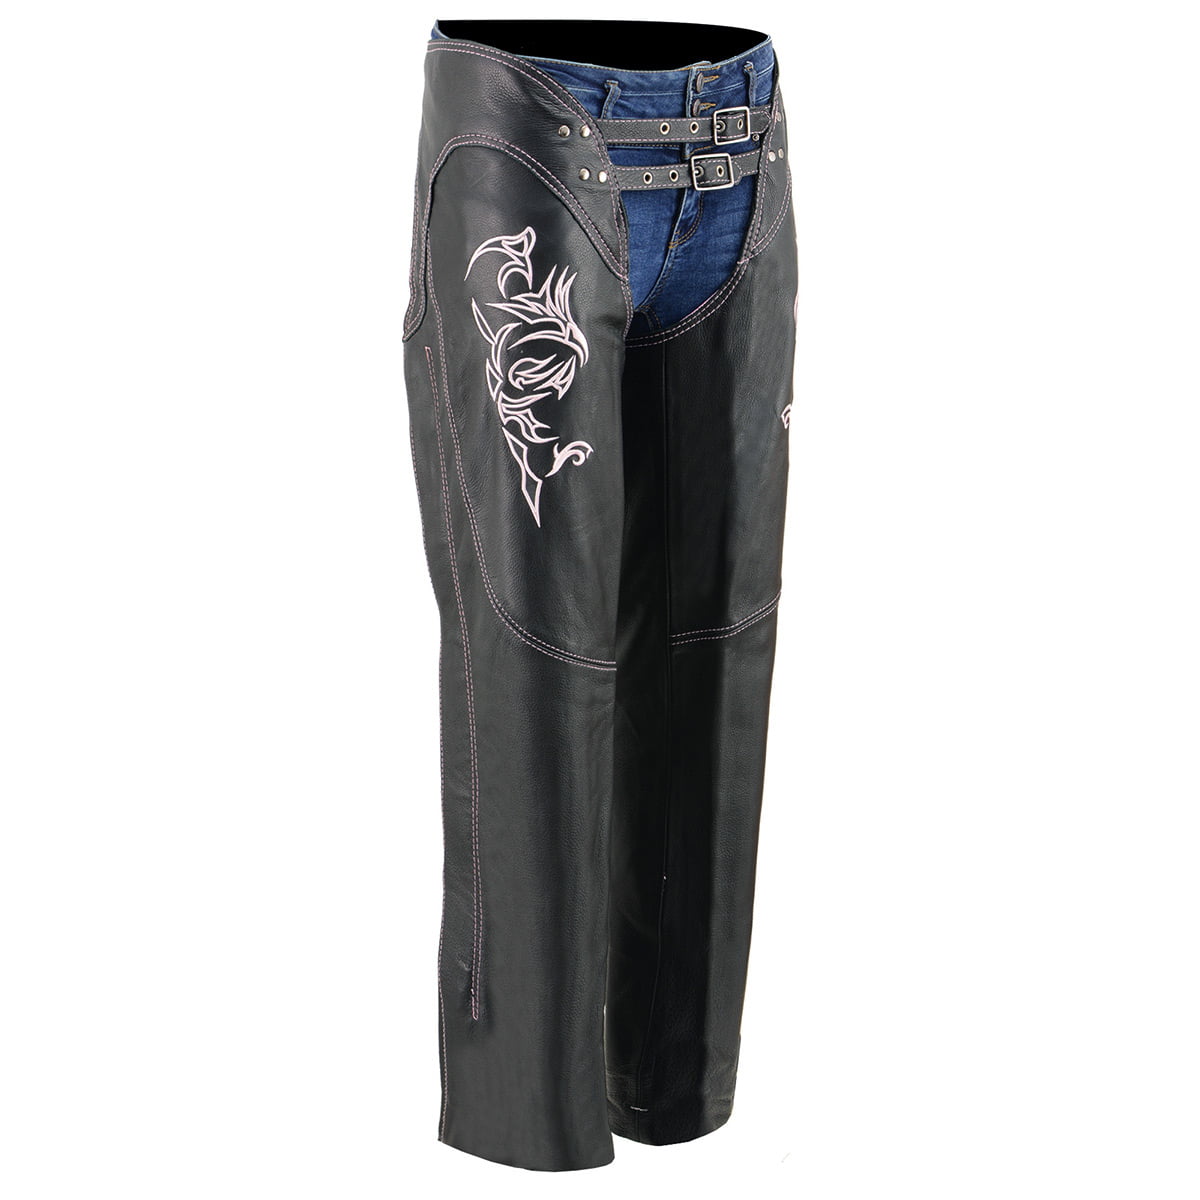 New Harley Davidson Womens Leather Motorcycle Chaps Size XS Black